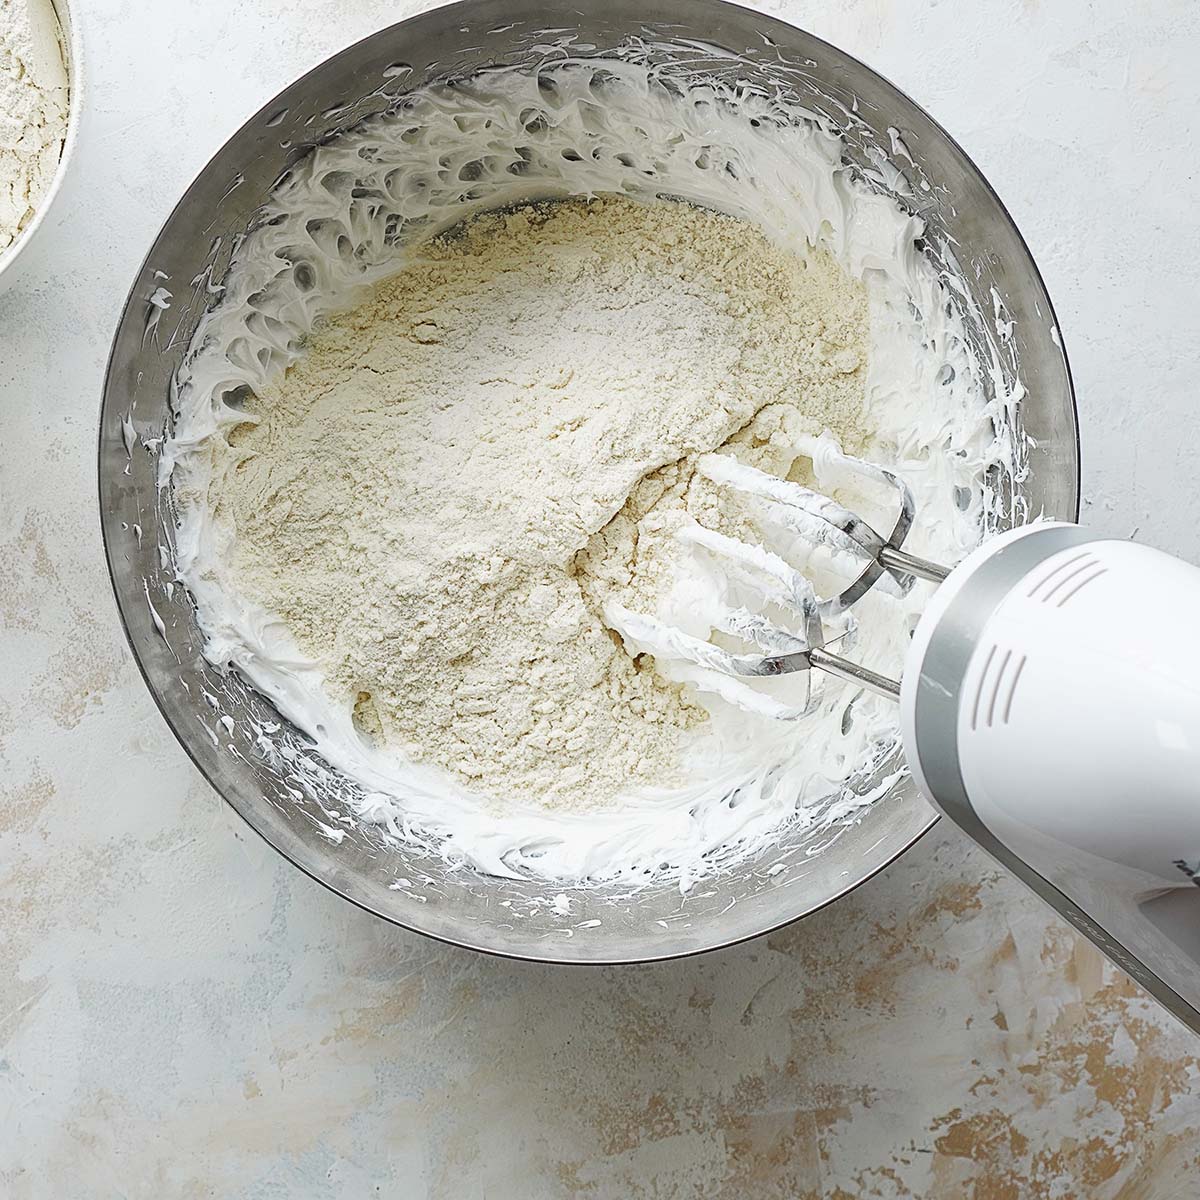 Kneading with a hand mixer flour and lard in a large mixing bowl.